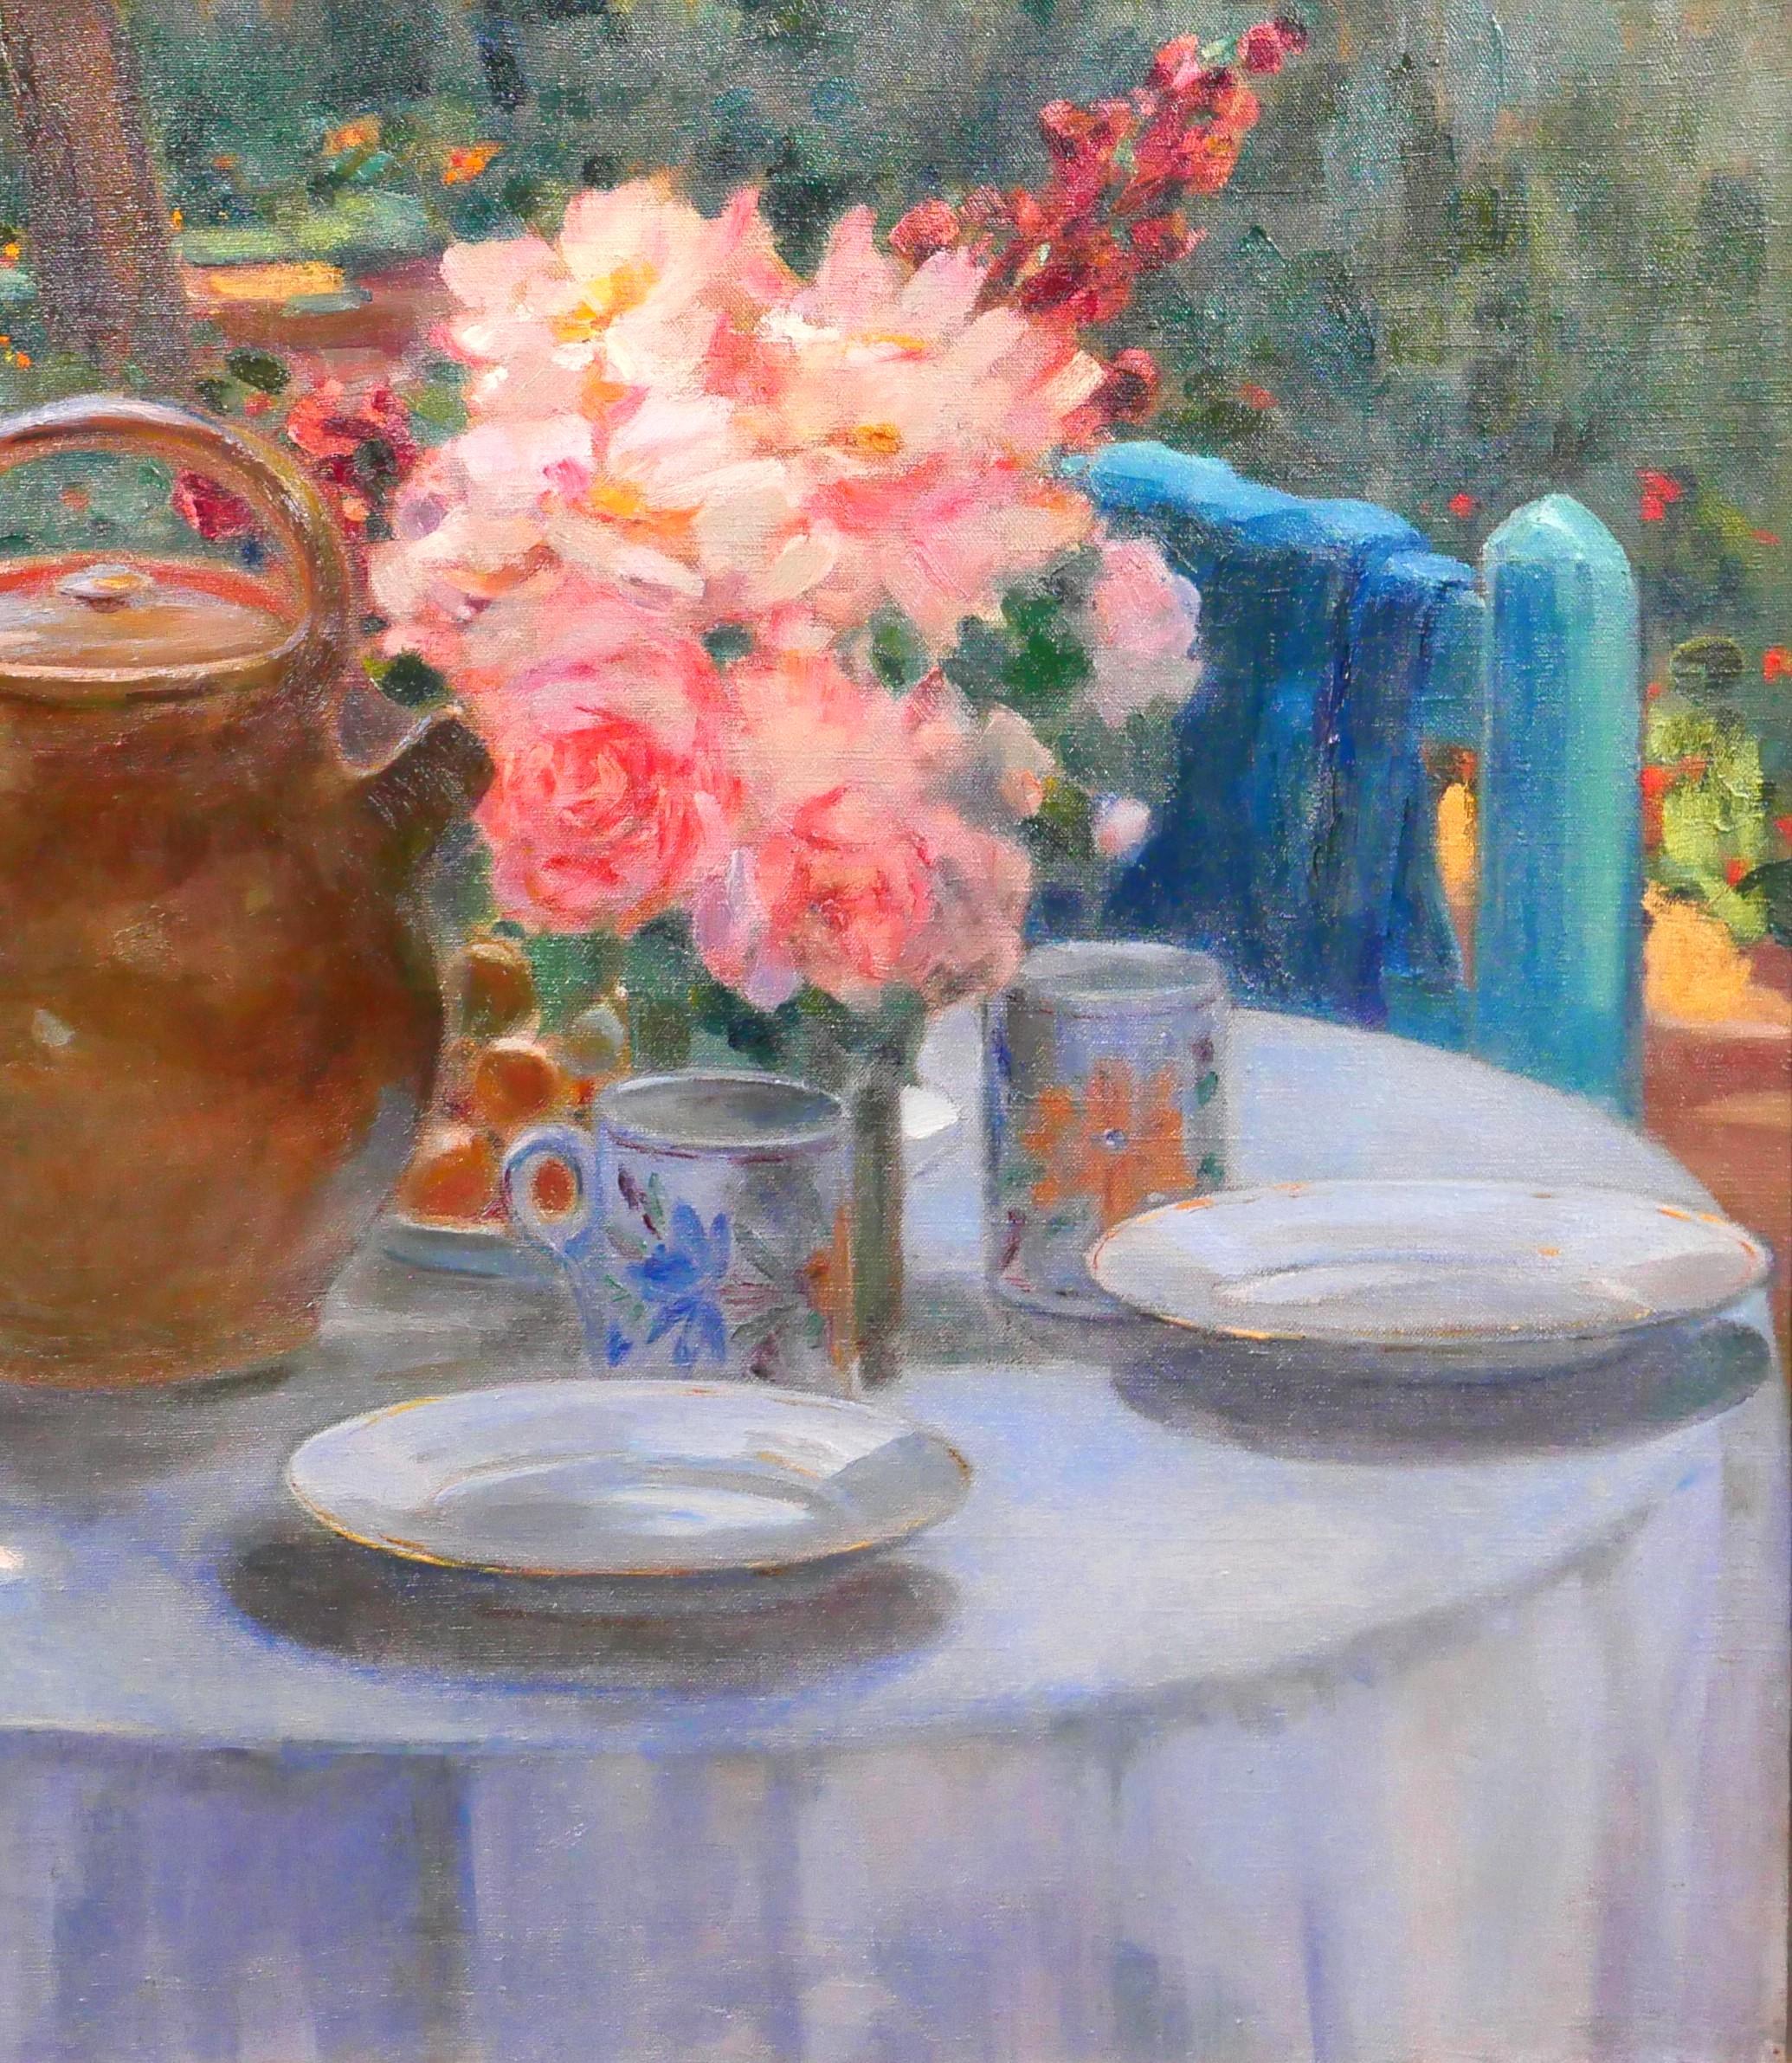 Louise ALIX
1888-1980
The table in the garden, flowers at tea time
Painting, oil on canvas
Signed
Painting: 73 x 60 cm (28.7 x 23.6 inches)
Modern frame in natural oak (American box): 82.5 x 69.5 cm (32.5 x 27.4 inches)
Back, stamp of the Salon des